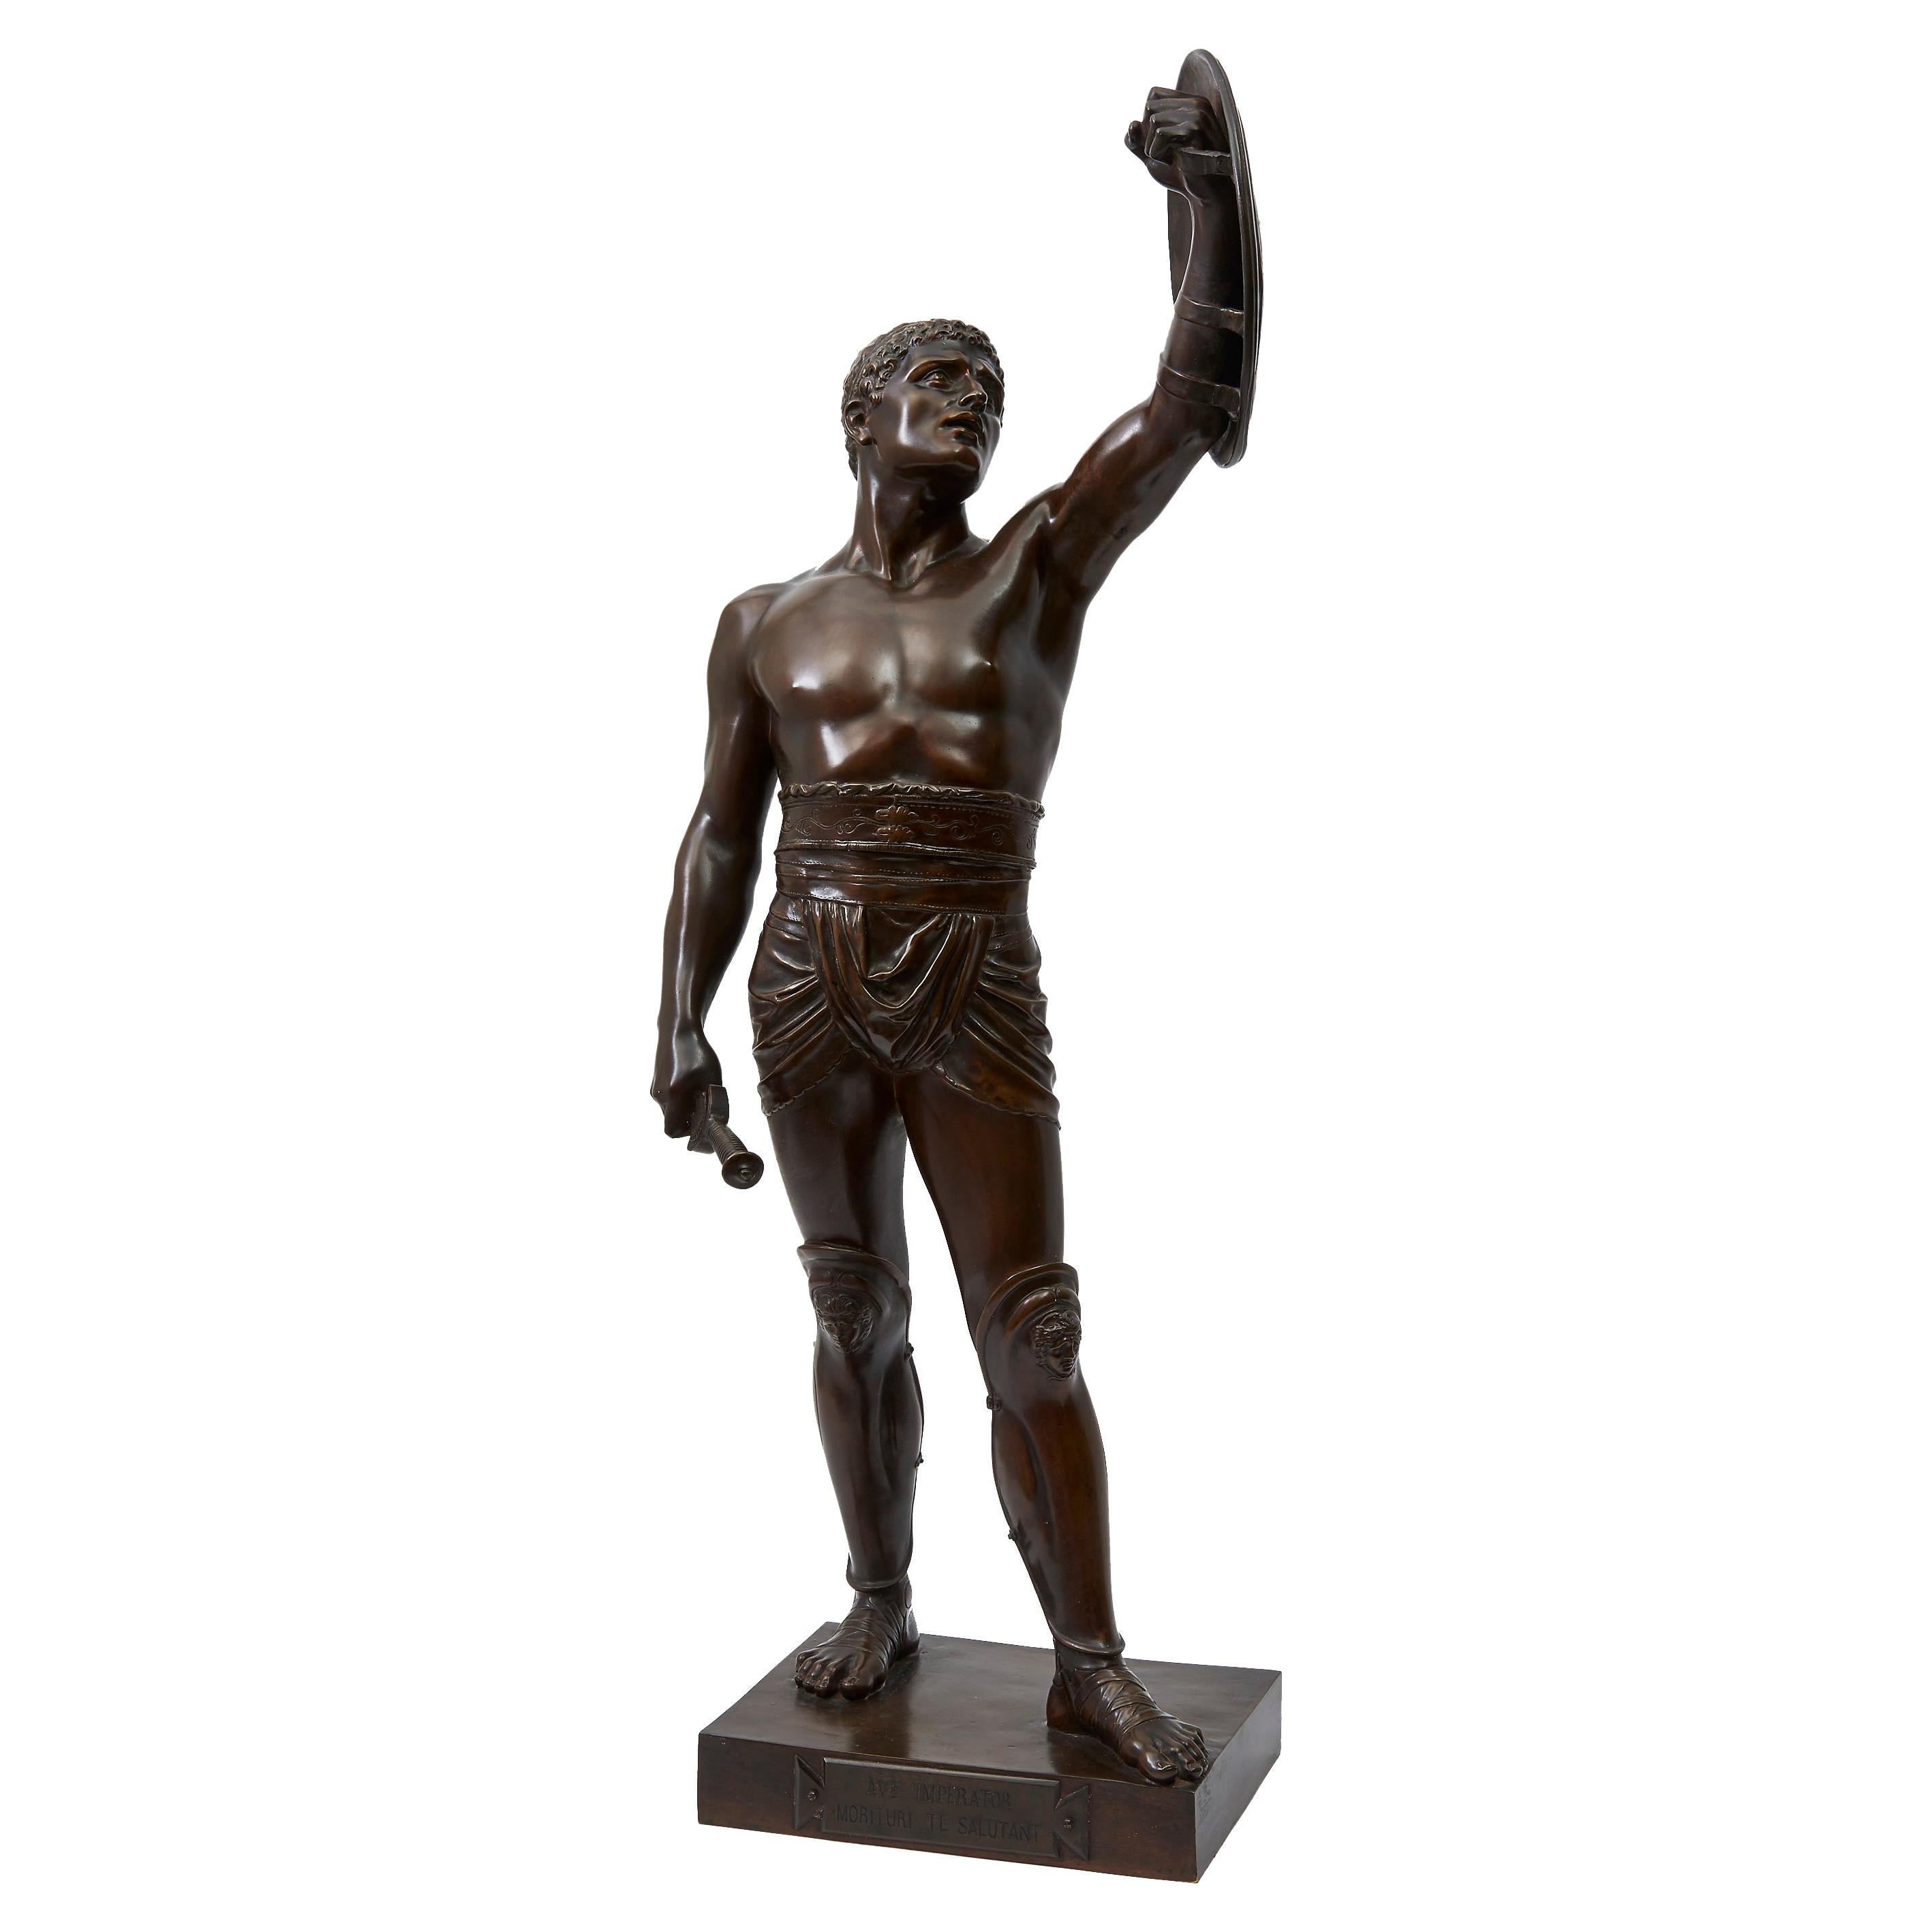 Bronze Sculpture of a Gladiator by French Sculptor Emile Guillemin, 1841-1907 For Sale